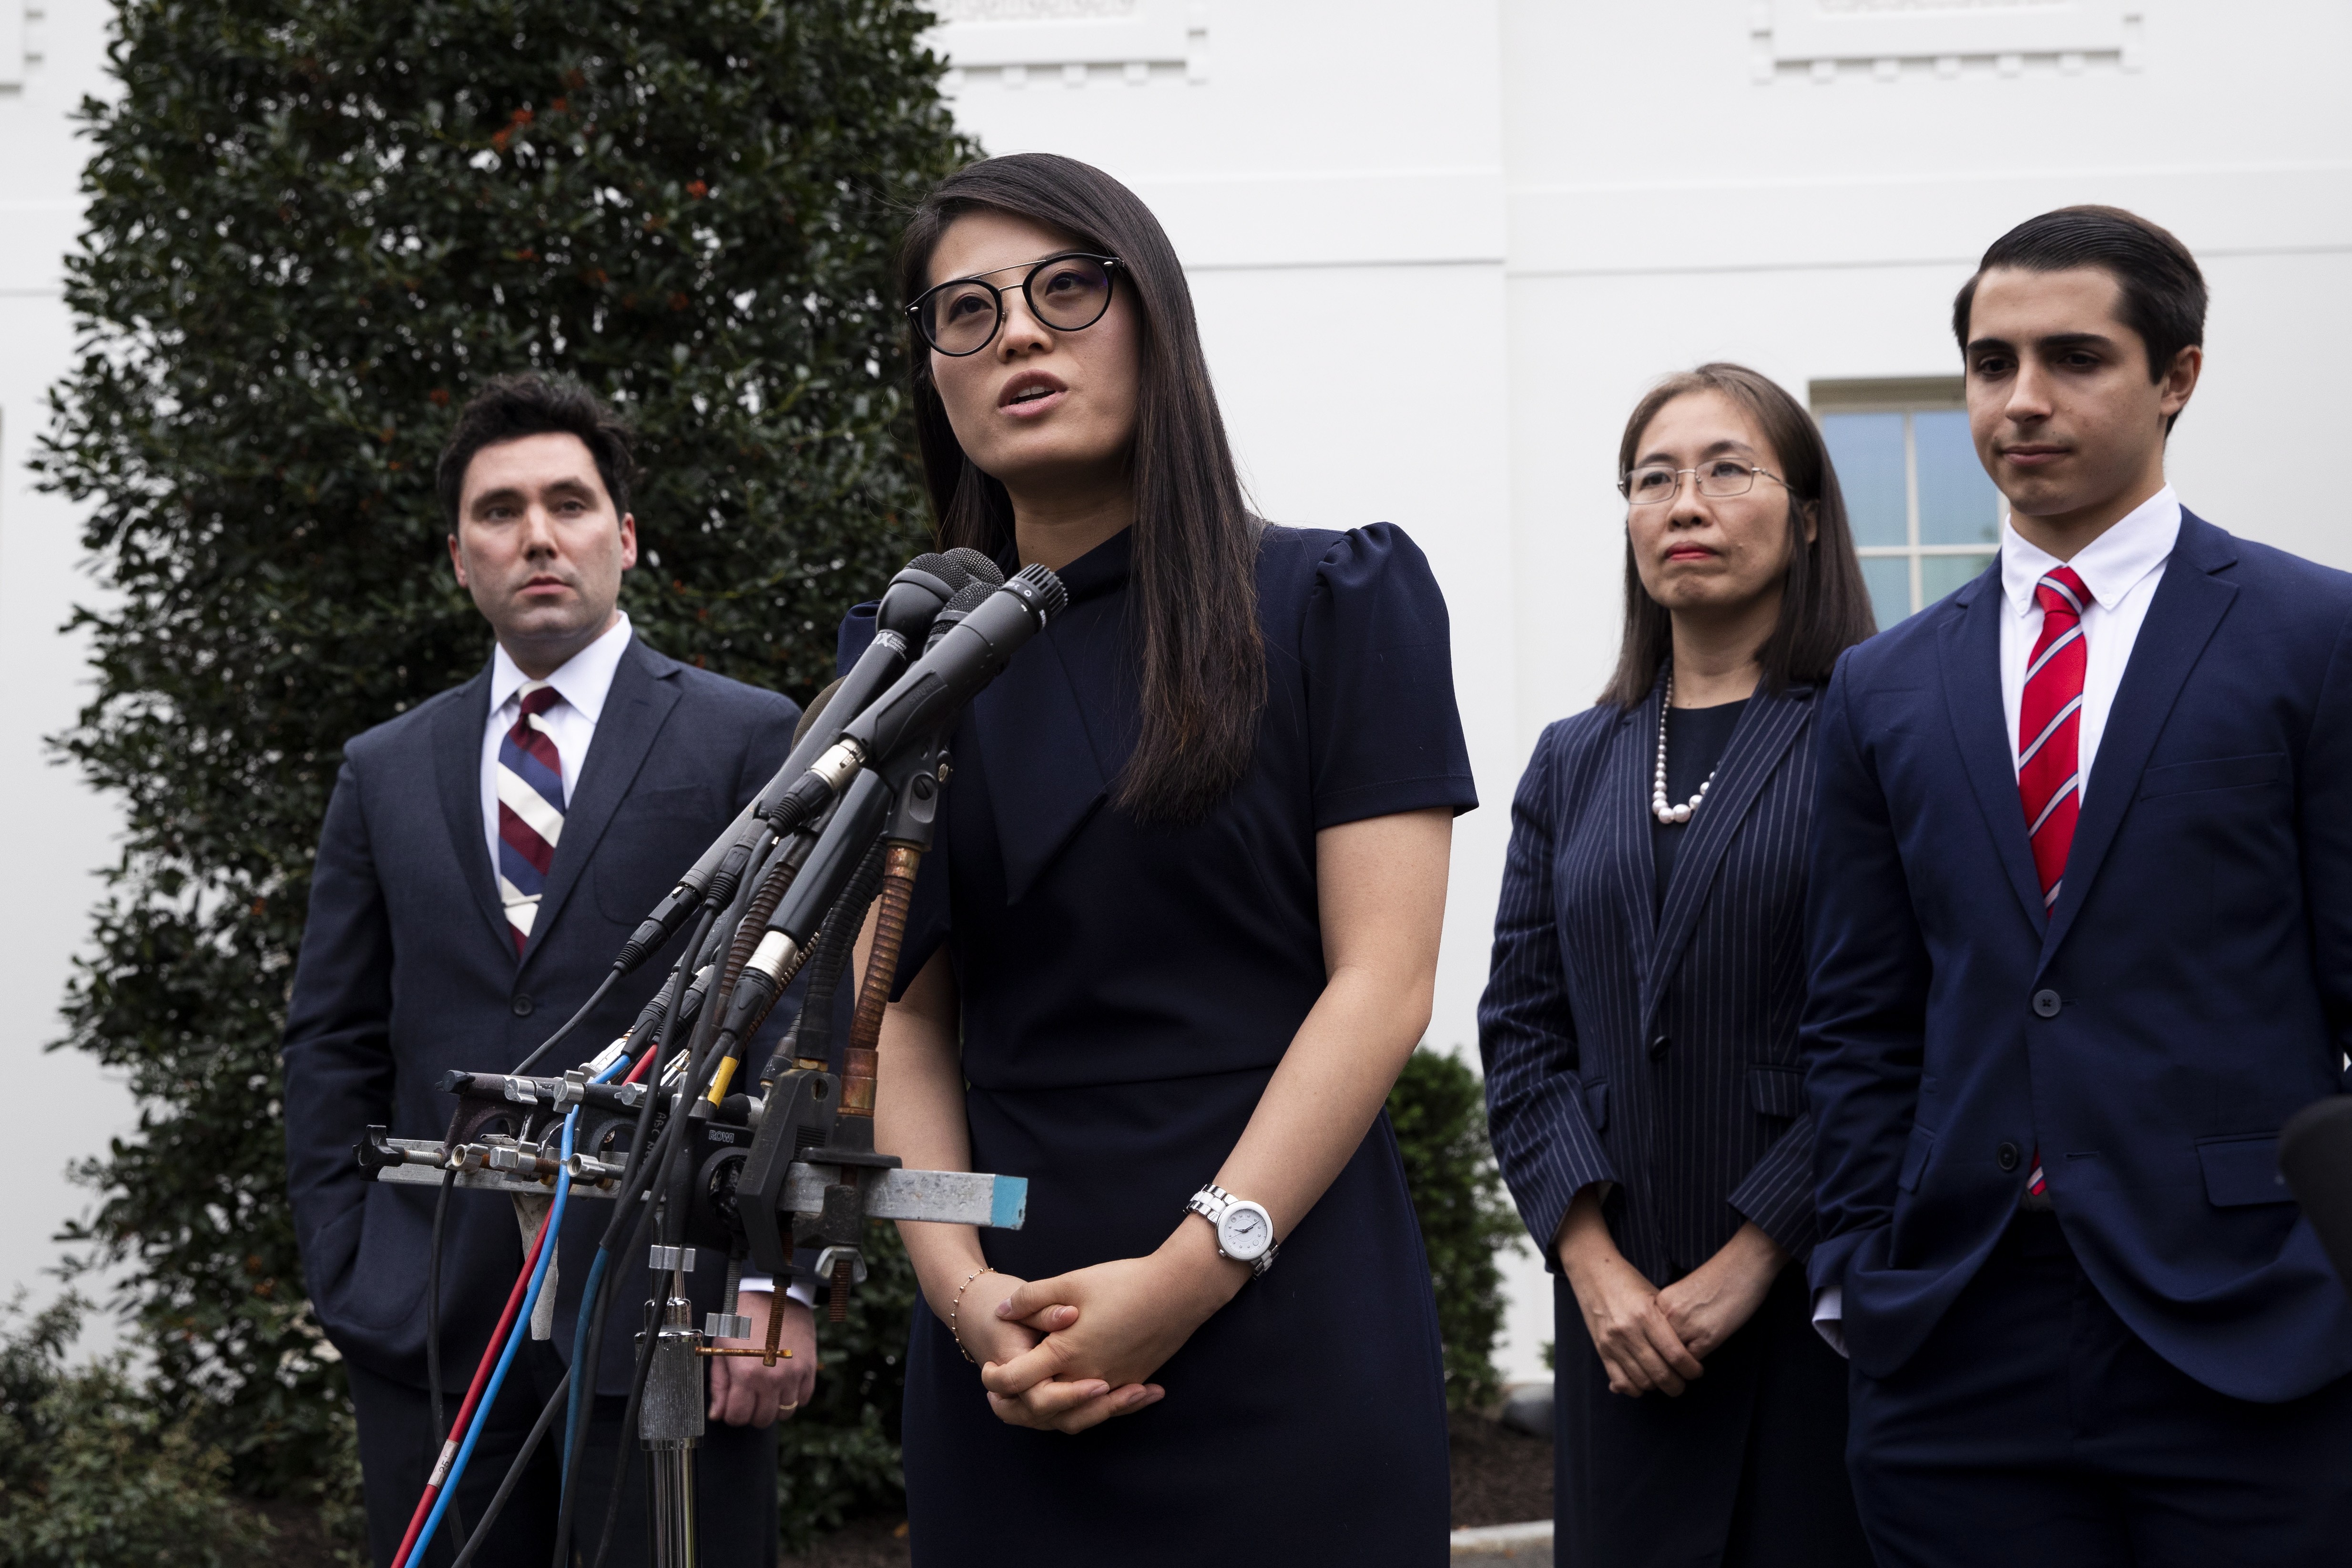 Grace Jo (centre), who was born in North Korea, speaks to the media outside the White House after a meeting with US President Donald Trump on Thursday. Photo: EPA-EFE